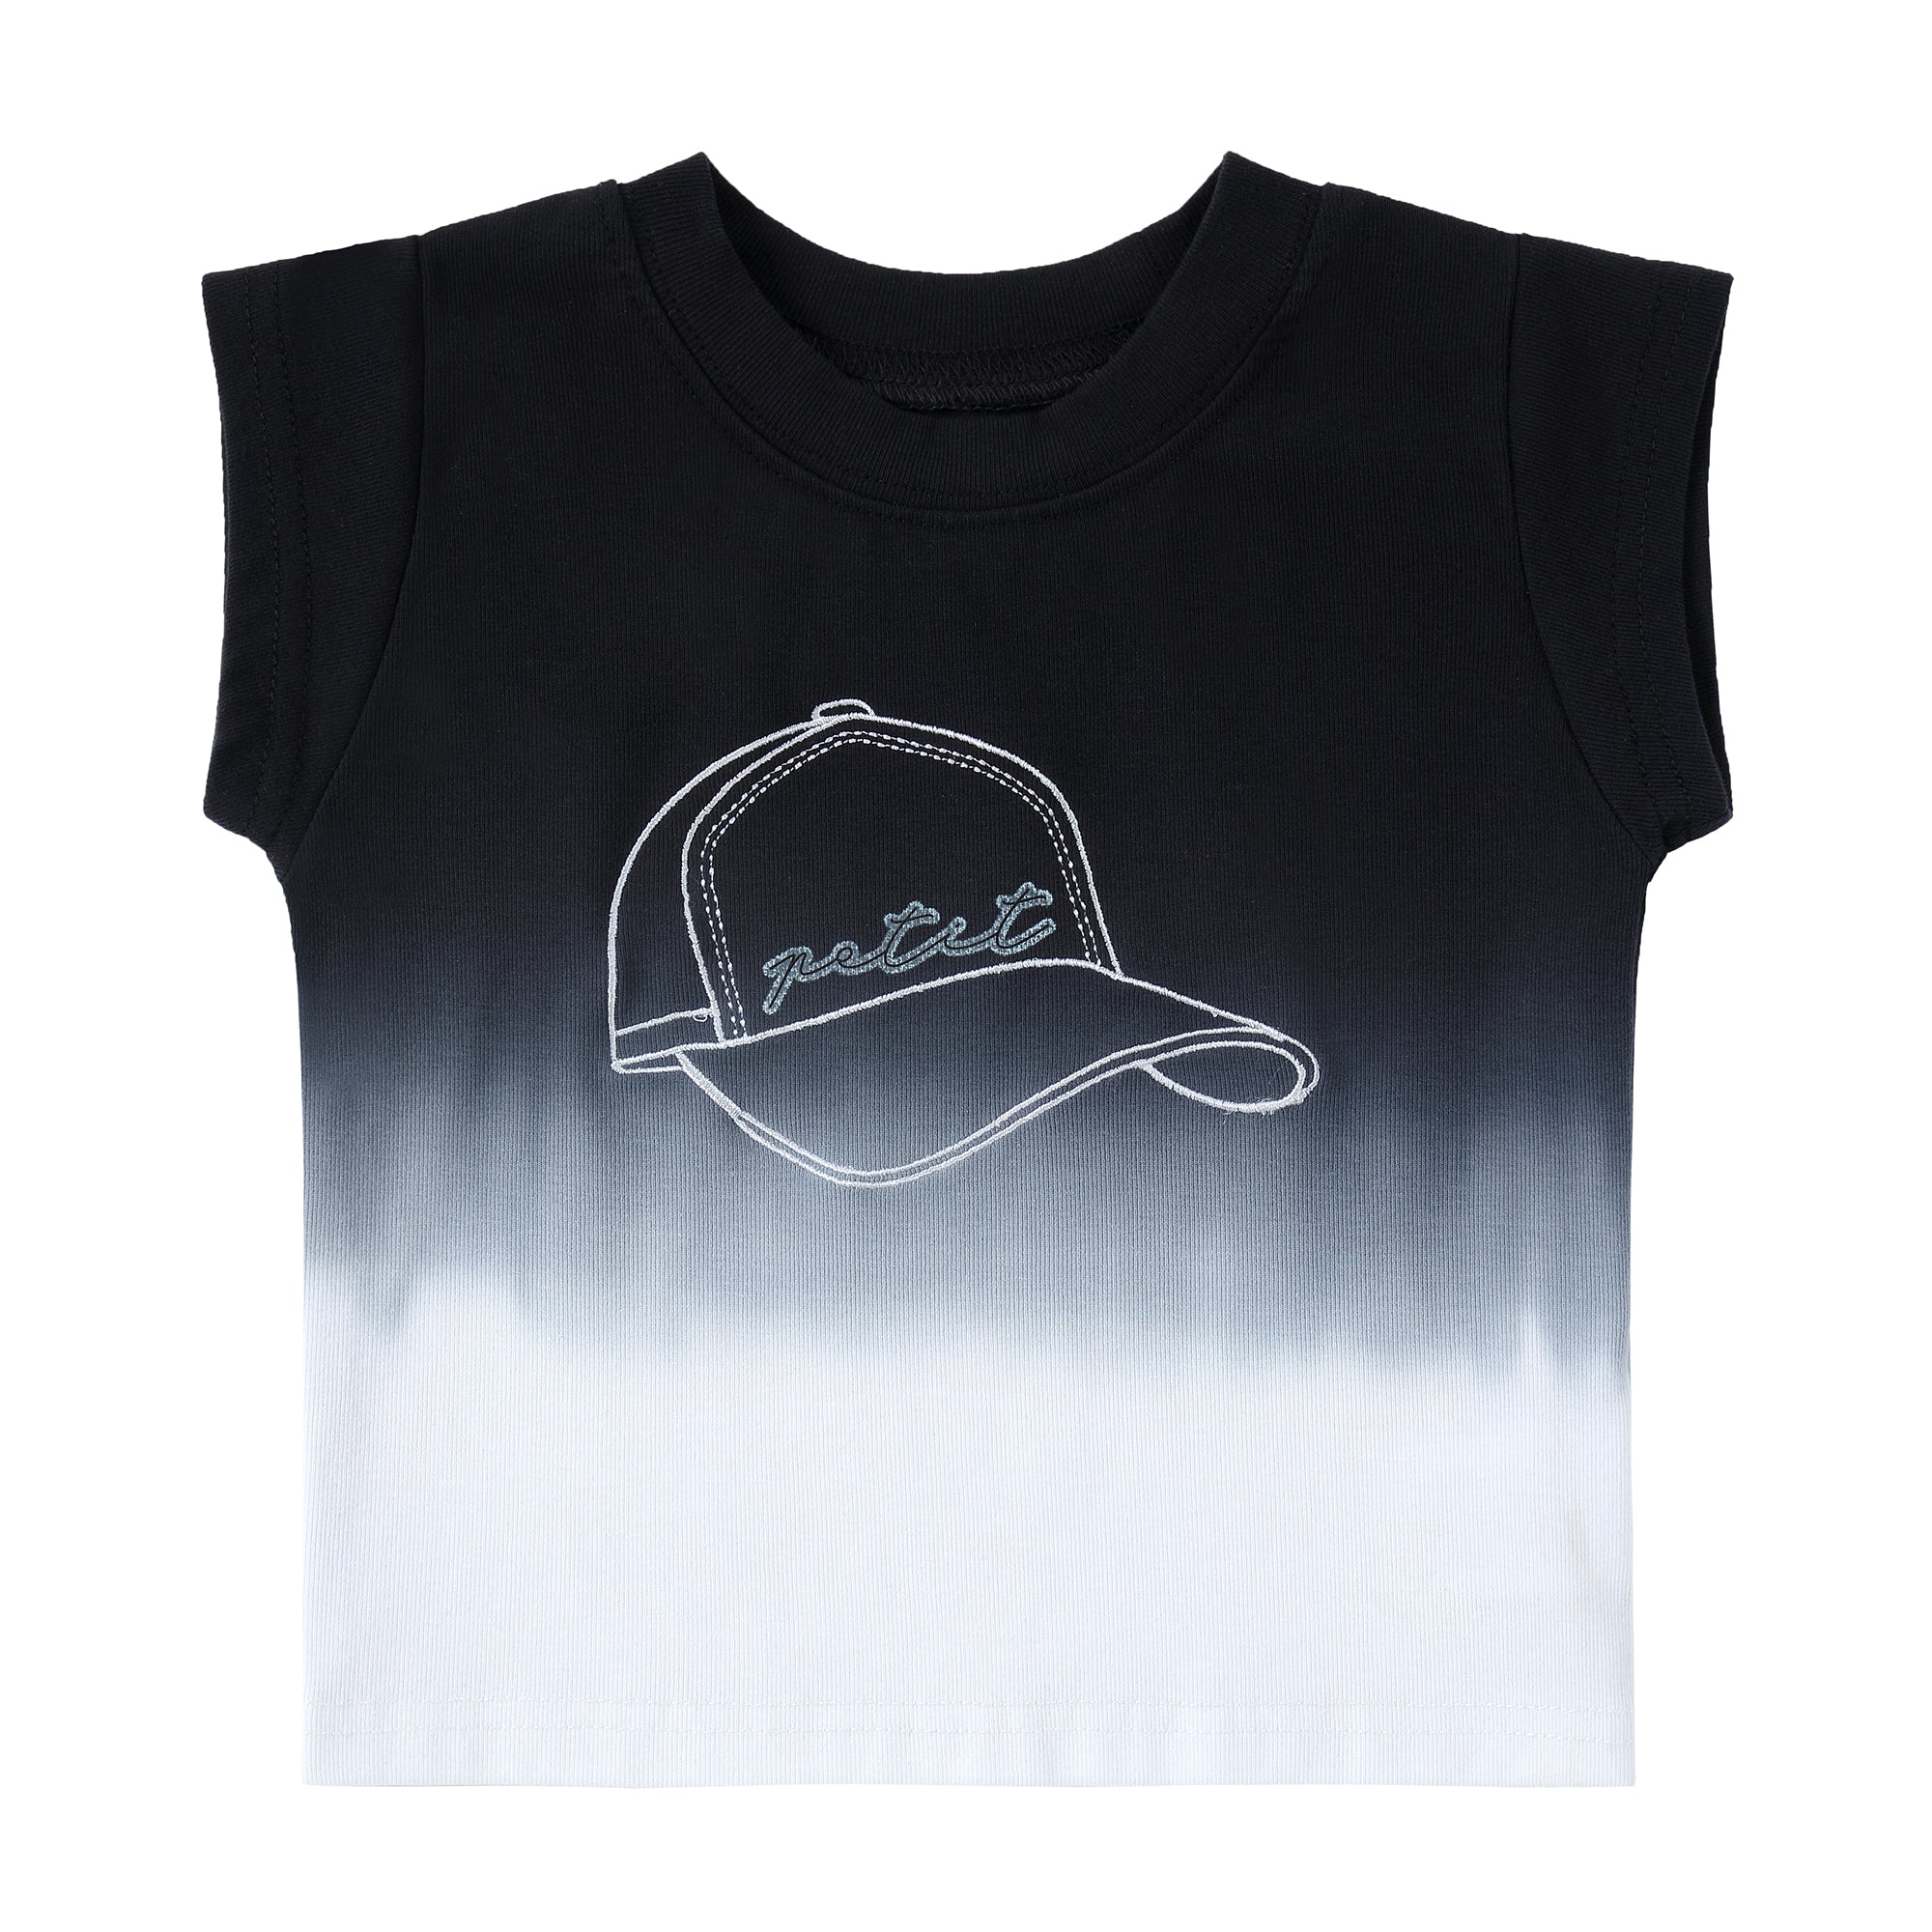 Black Dip Dye T-Shirt With Hat Embroidery